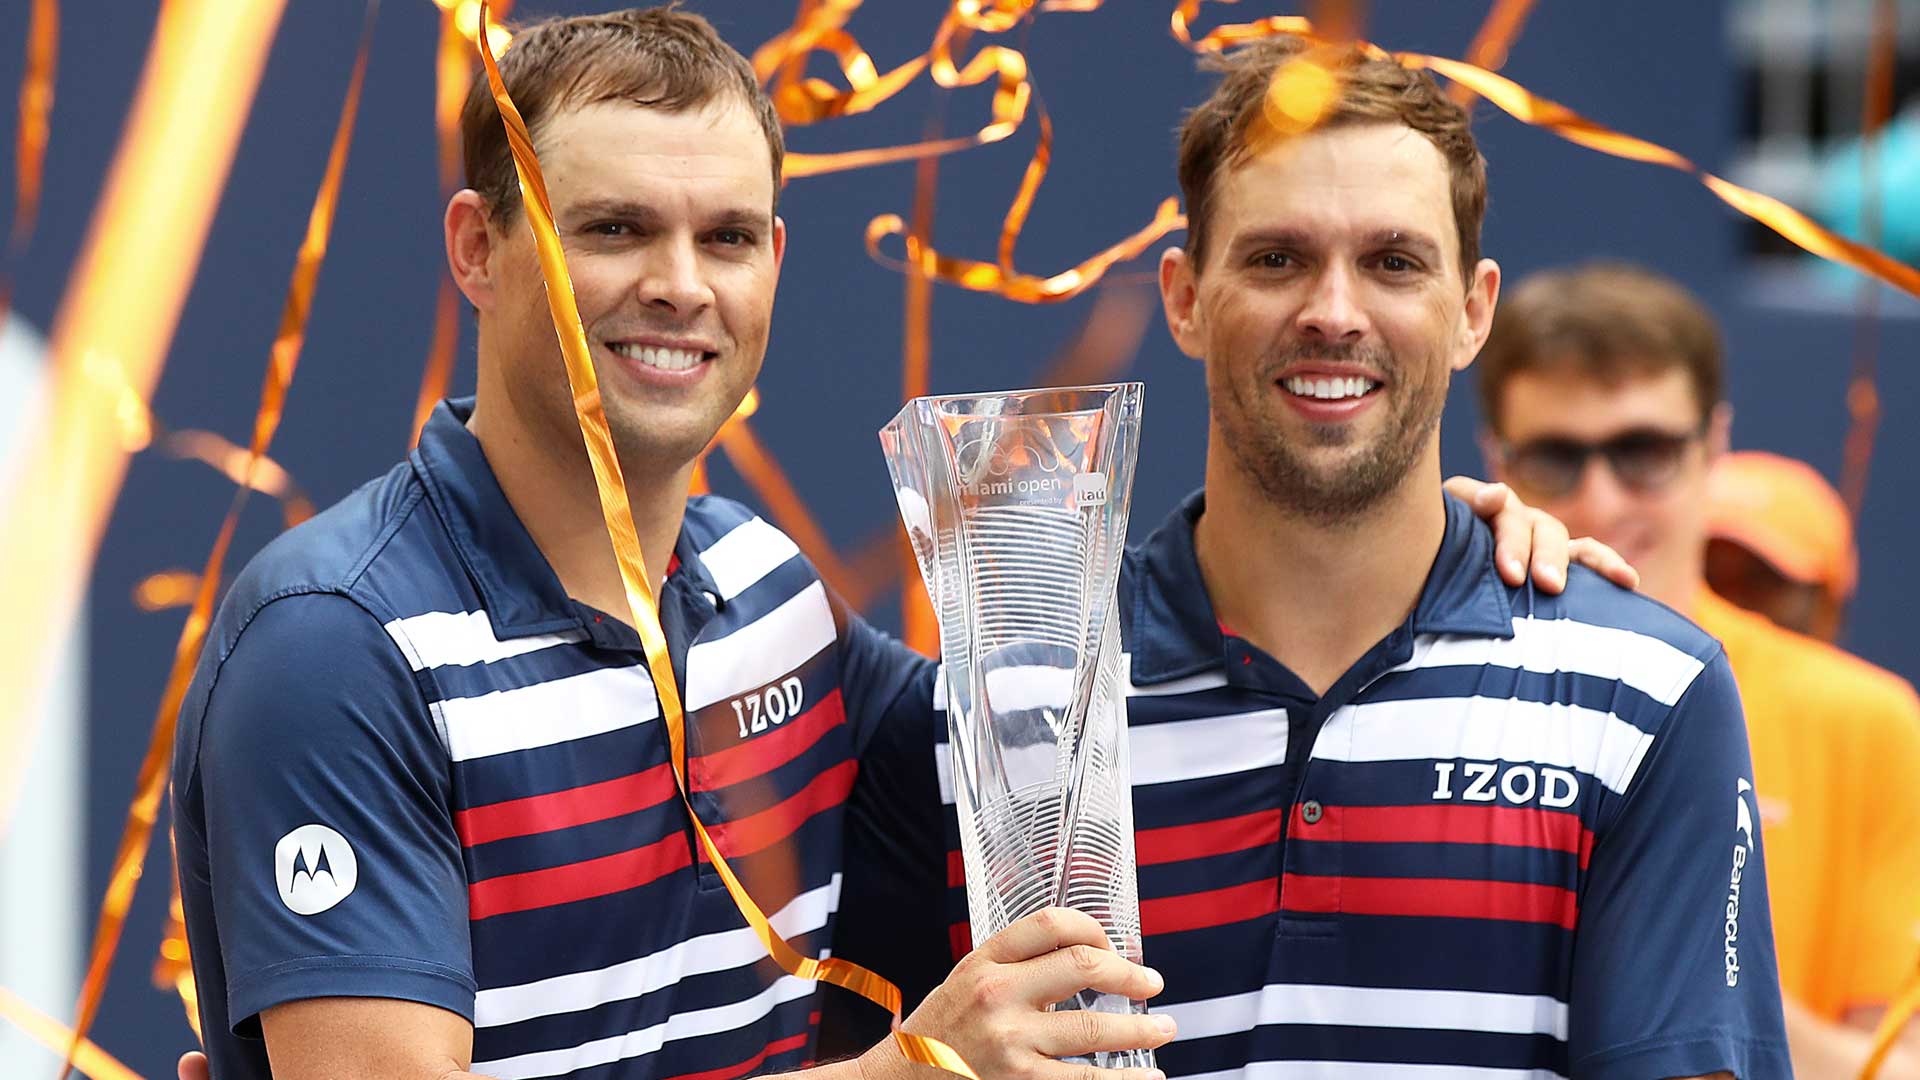 The Bryan Brothers win the doubles title at the <a href='https://www.atptour.com/en/tournaments/miami/403/overview'>Miami Open presented by Itau</a>.